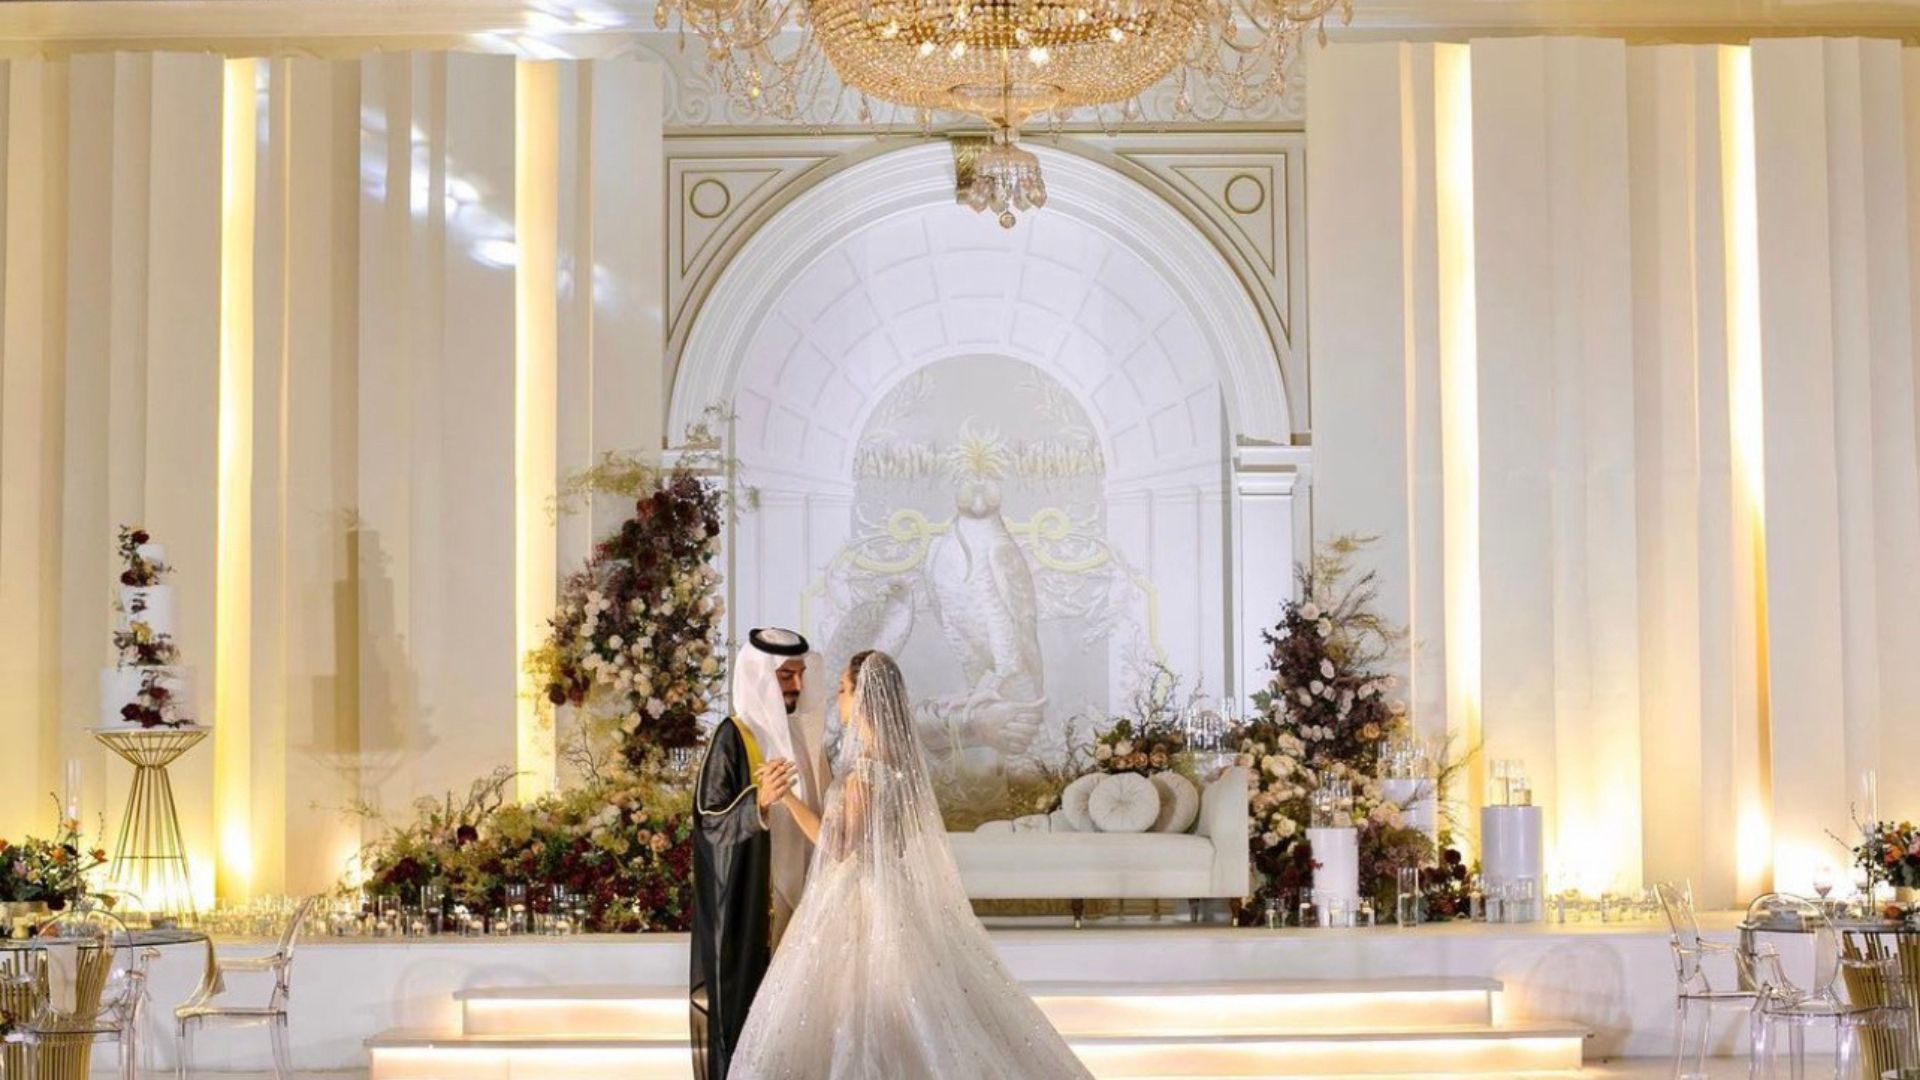 Most Expensive Wedding Venues In The World - 123WeddingCards